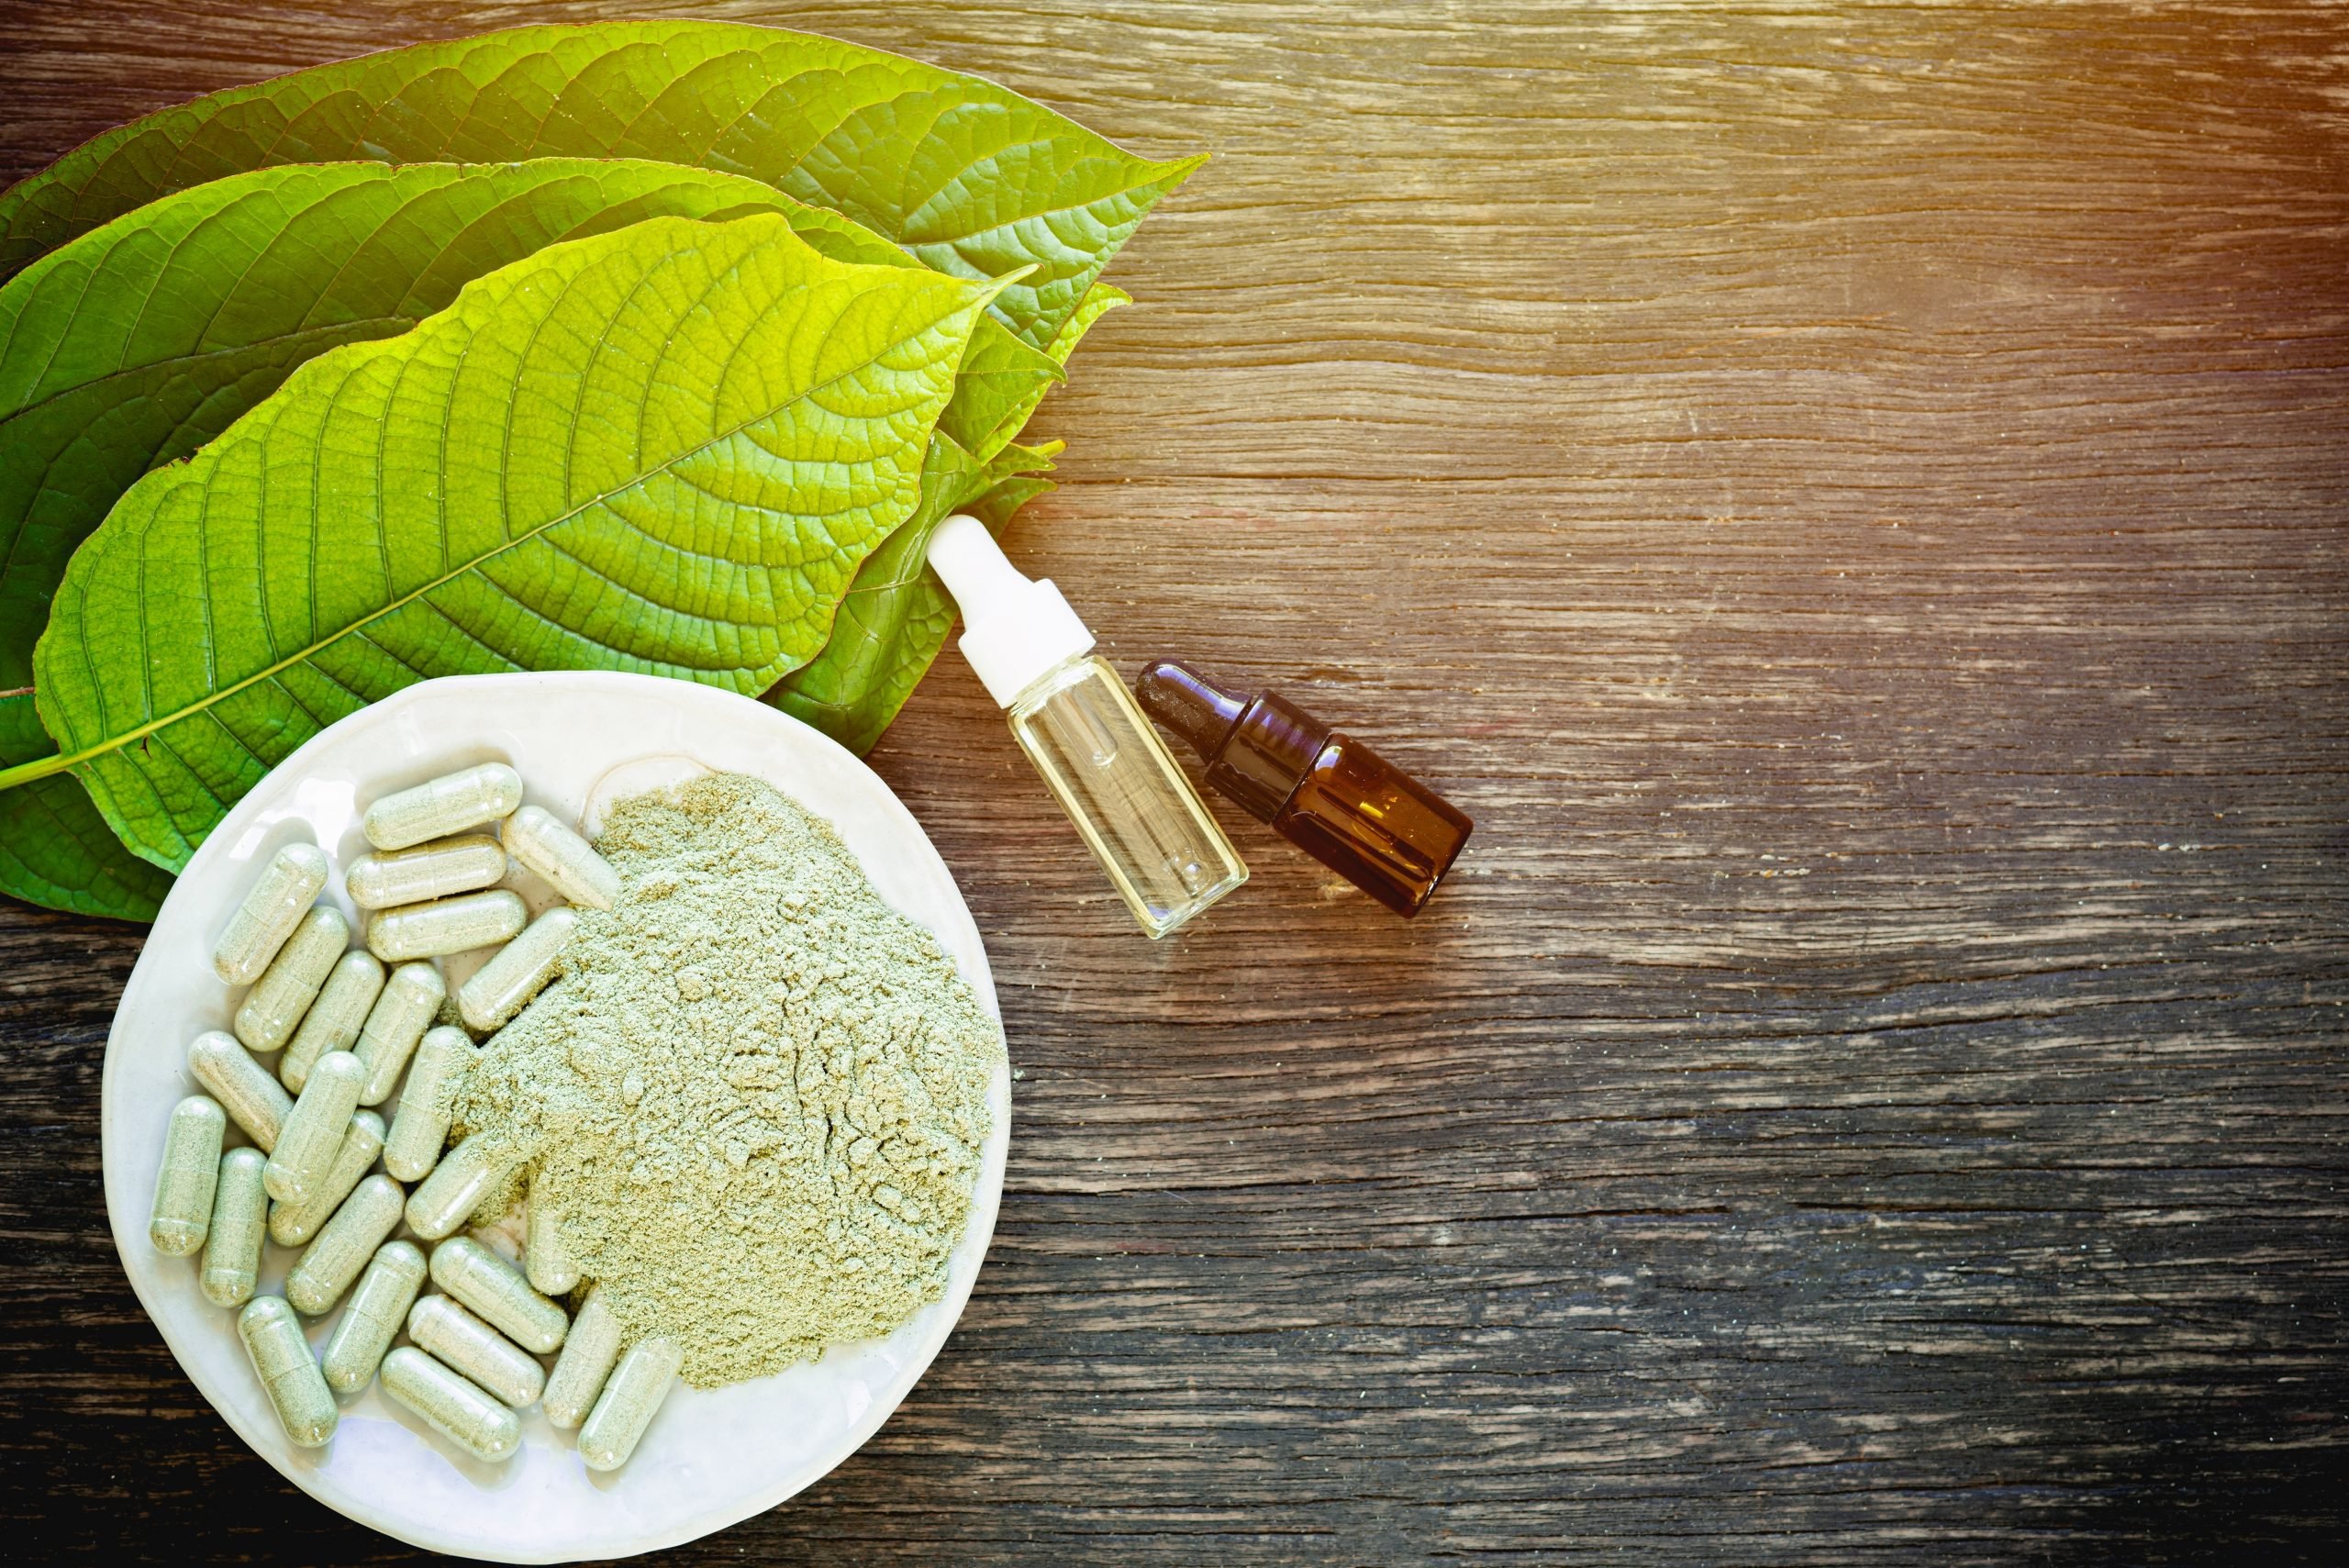 How Many Grams Of Kratom Are In A Tablespoon and Teaspoon?